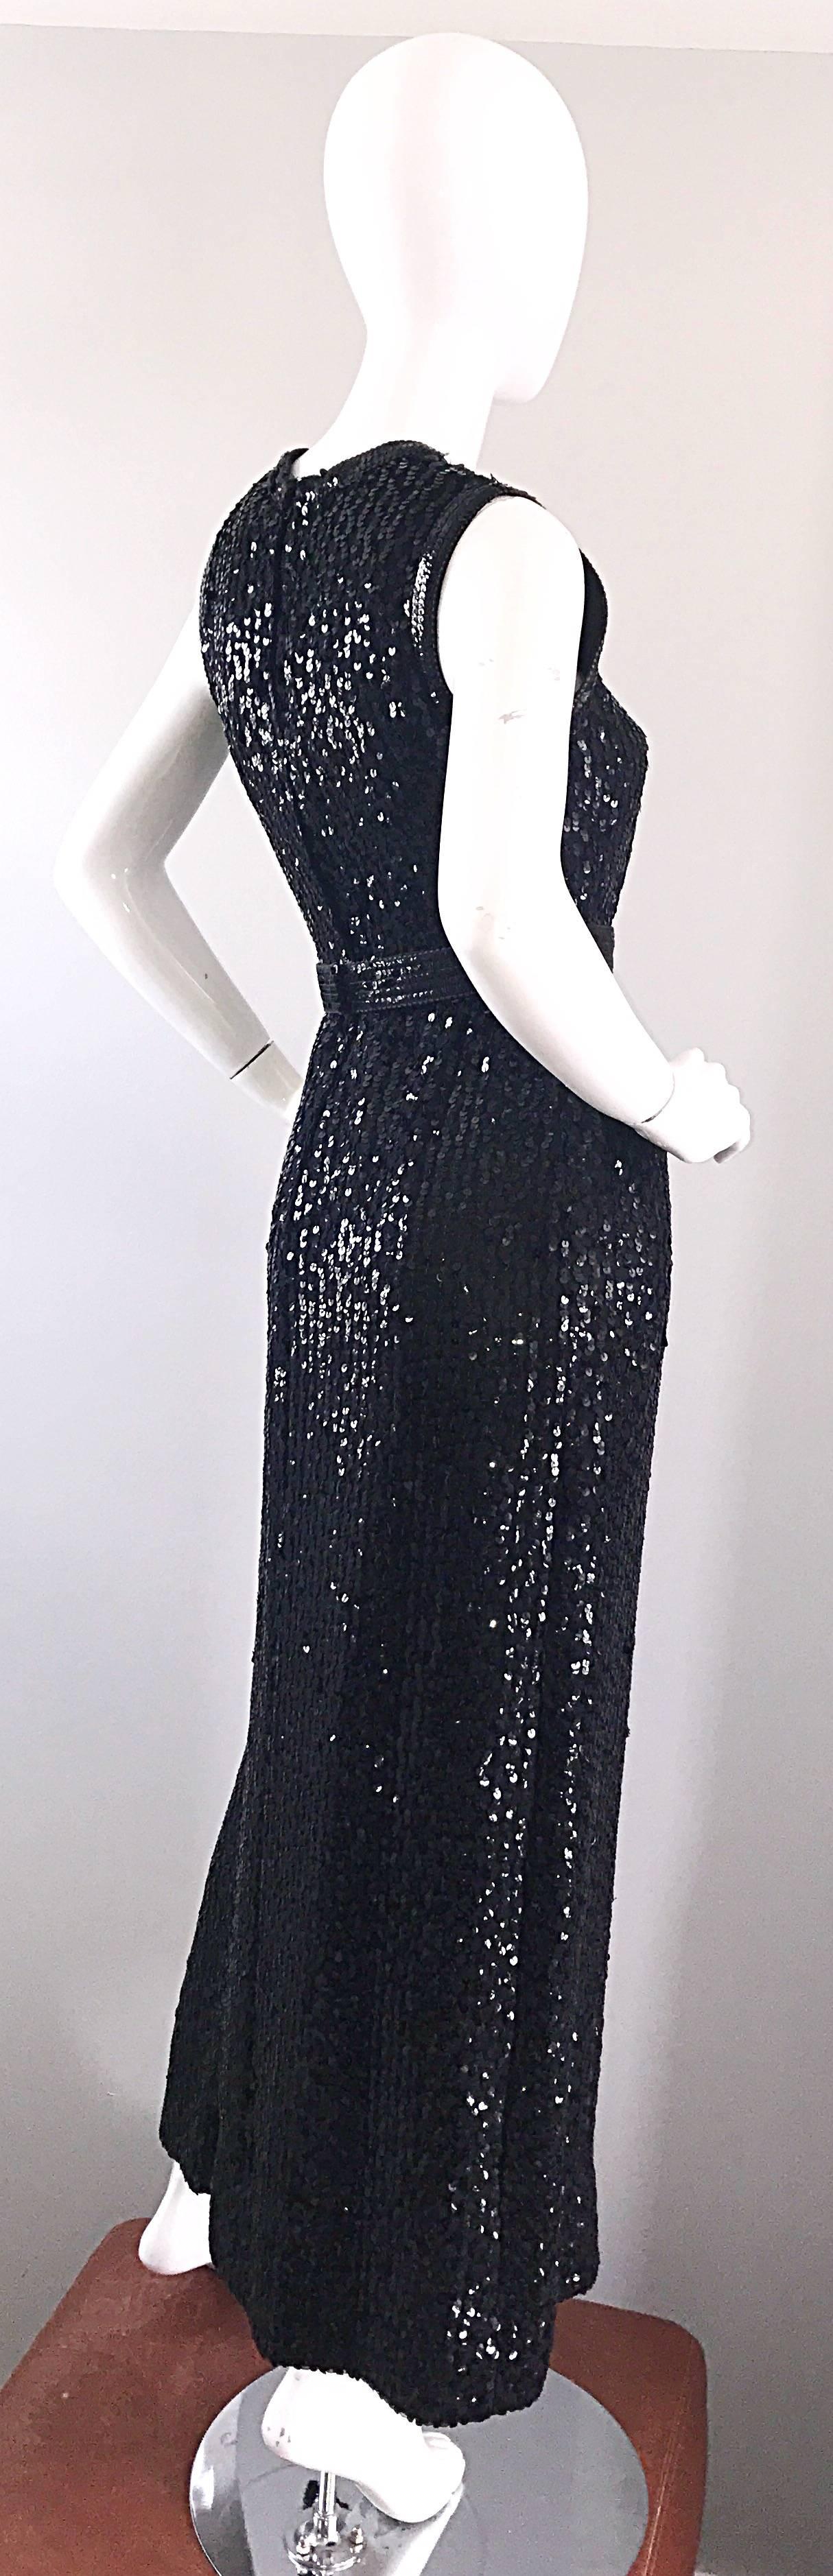 1970s Lillie Rubin Black Silk Sequin Belted Vintage 70s Sleeveless Evening Dress In Excellent Condition For Sale In San Diego, CA